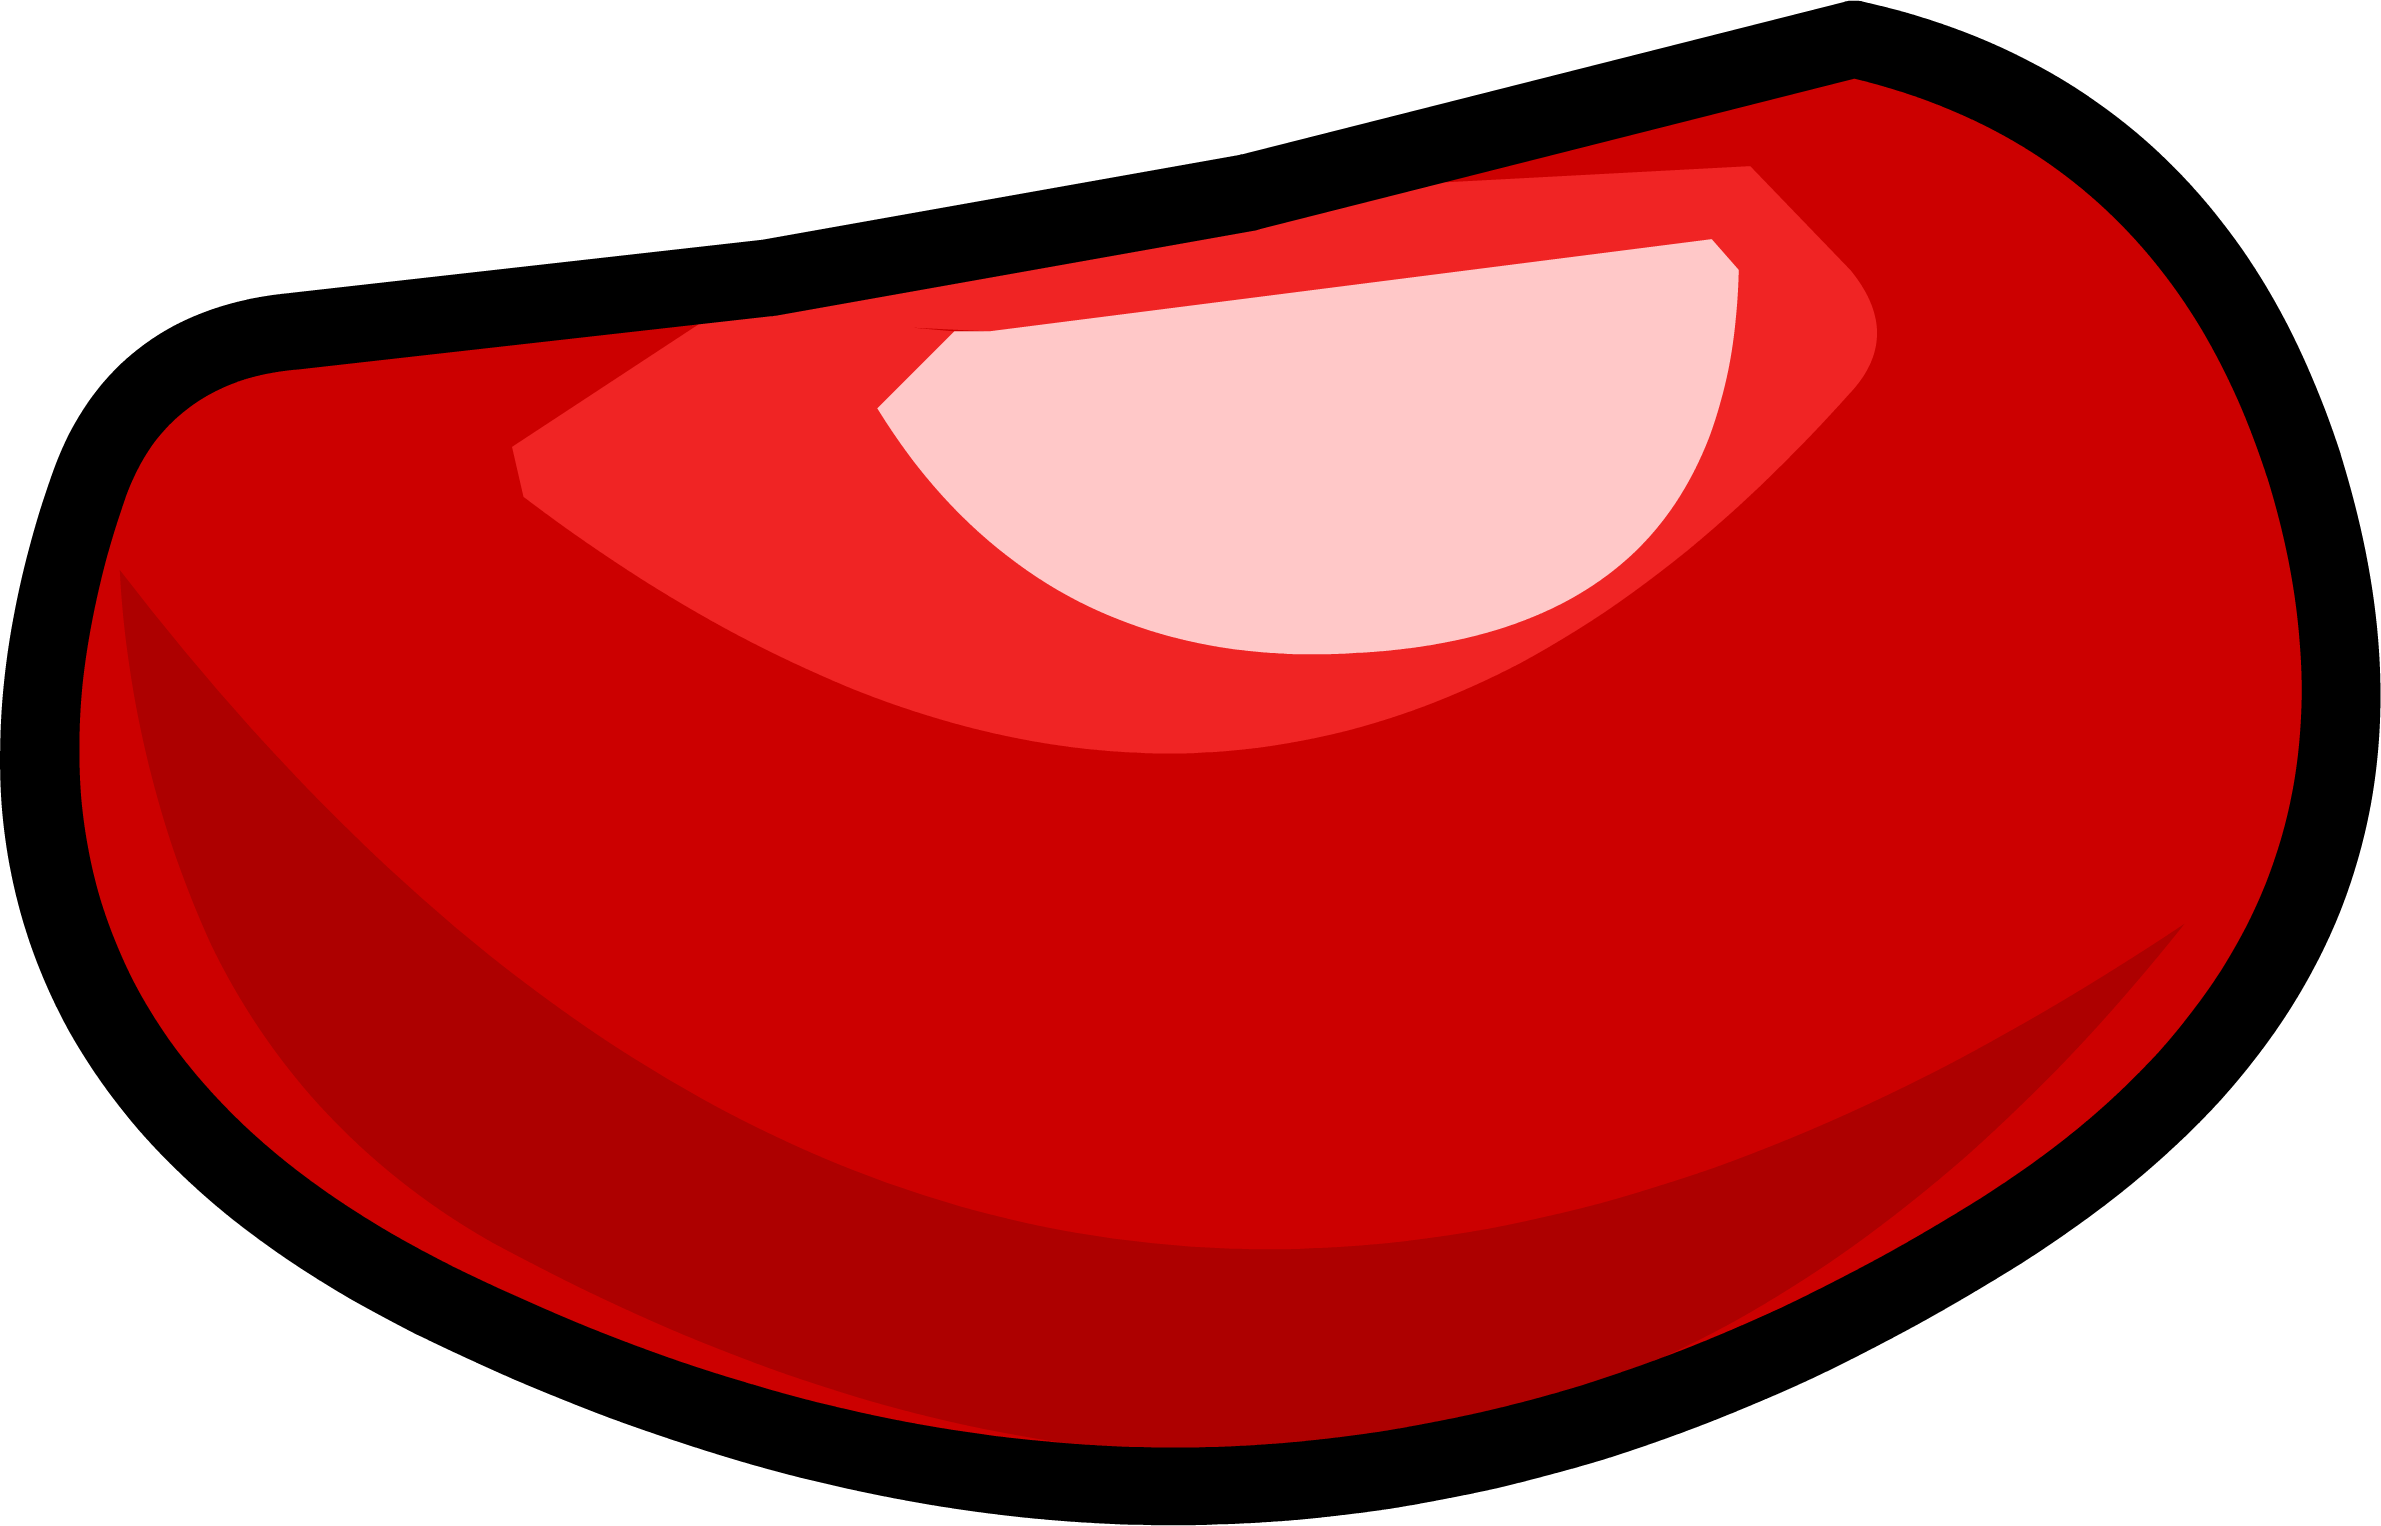 Jellybean PNG Image